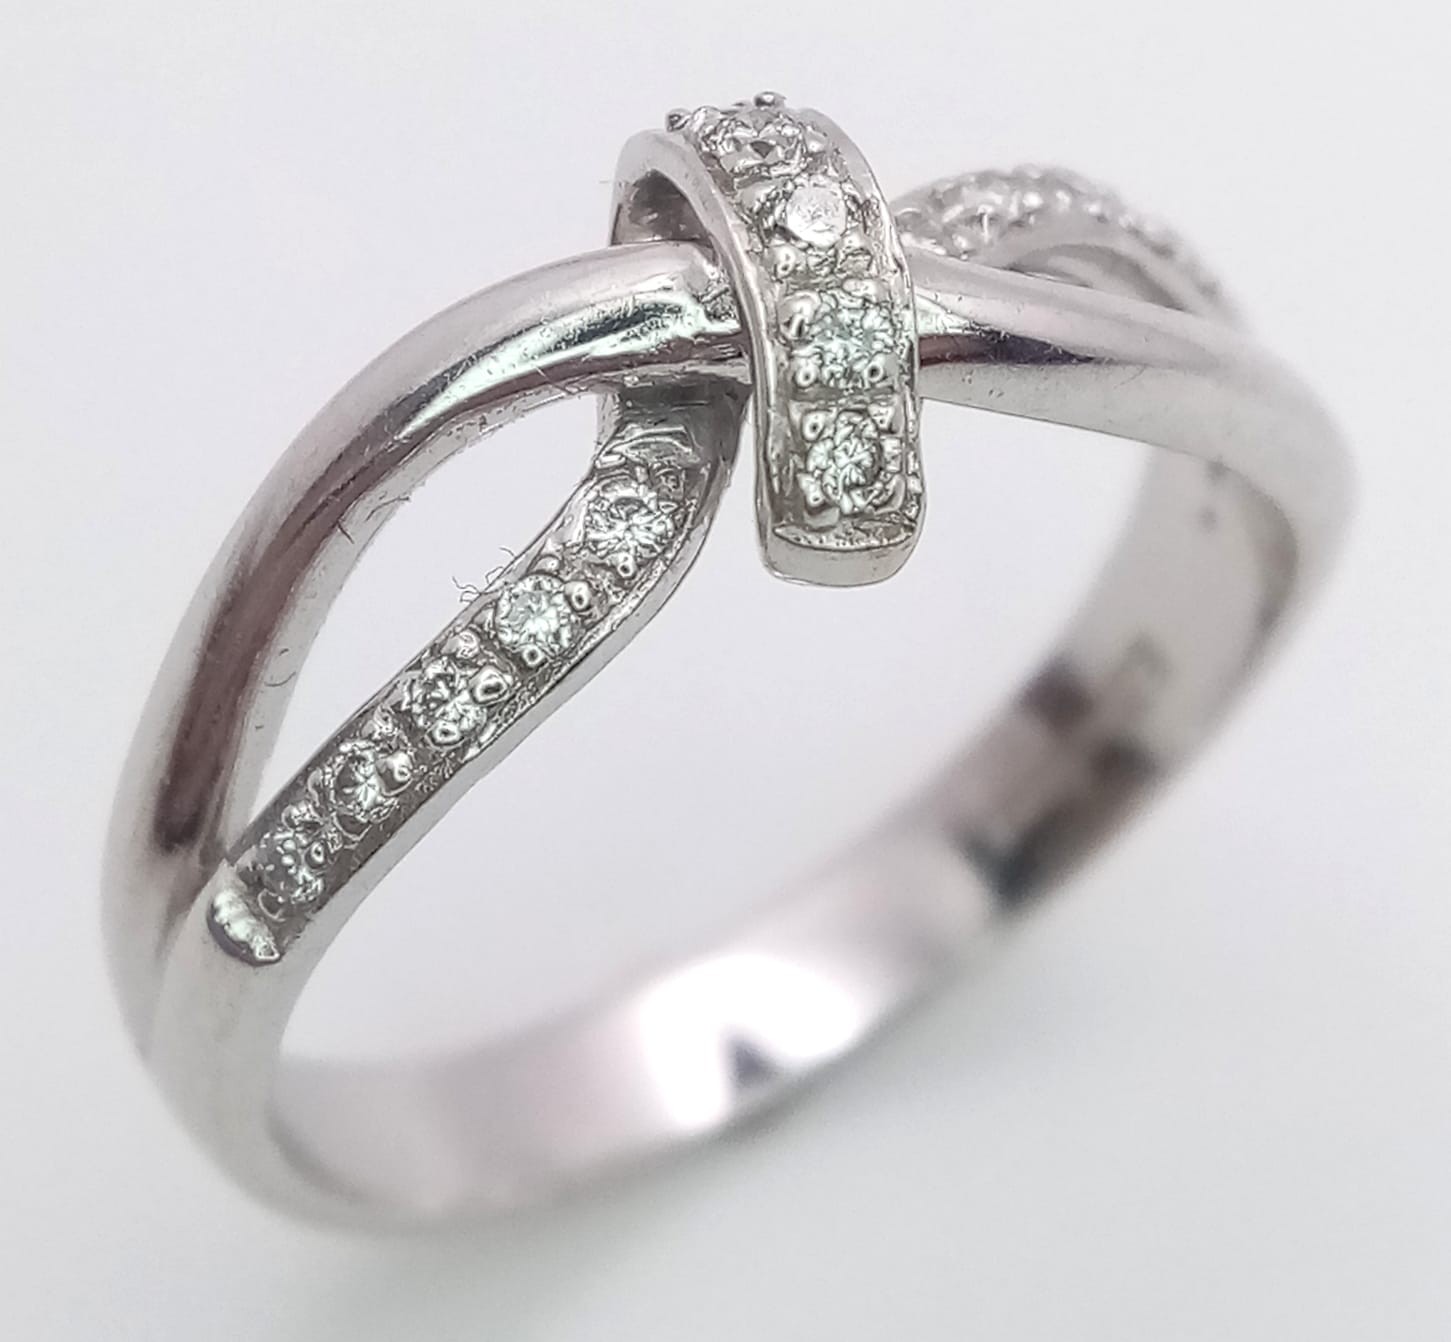 A FANCY 18K WHITE GOLD DIAMOND KNOTTED RING, APPROX 0.15CT DIAMONDS, WEIGHT 3.8G SIZE N